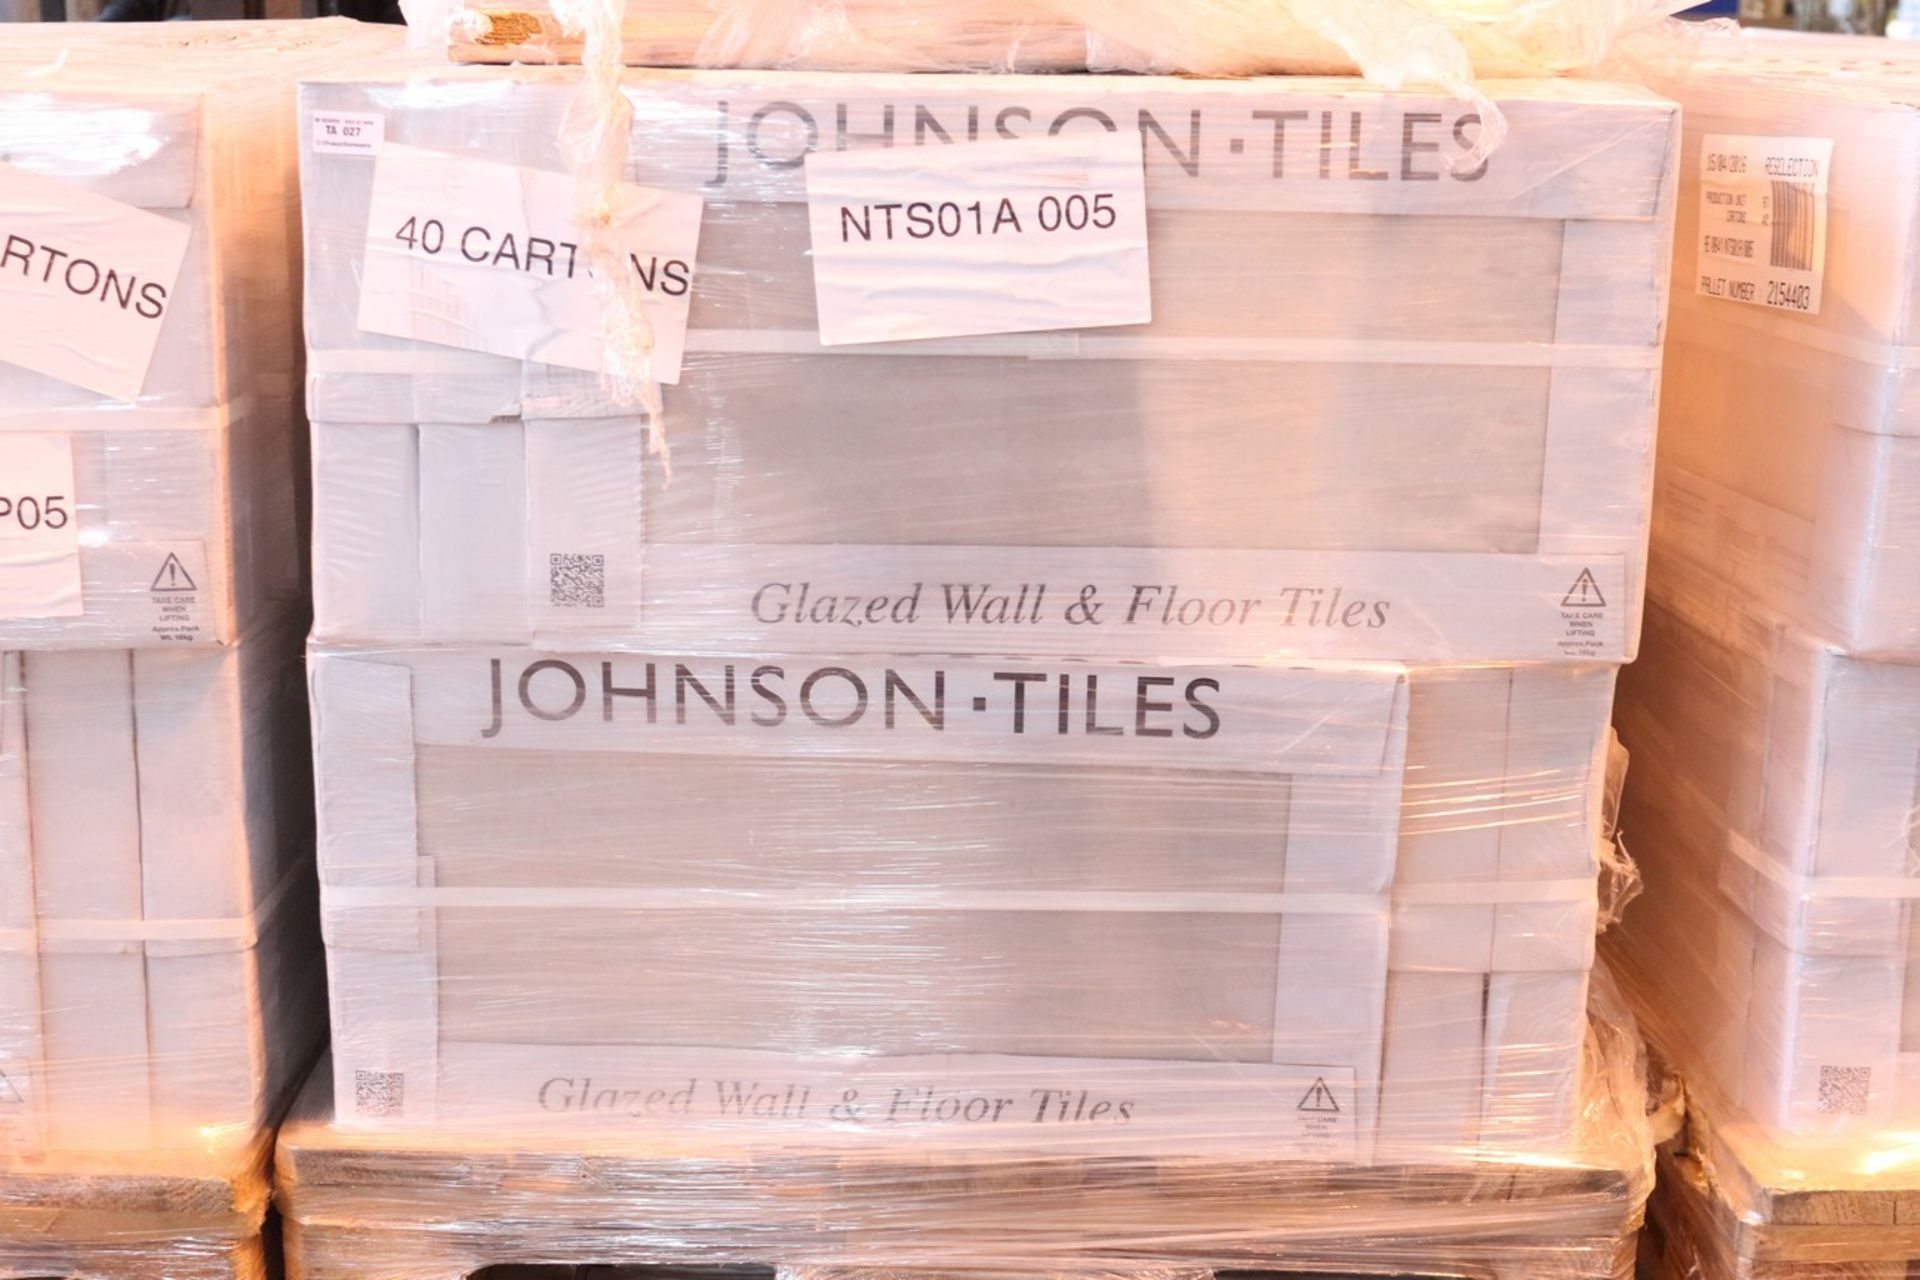 40X BY JOHNSON TILES BRAND NEW FACTORY SEALED 600X300 FLOOR TILES NTS01A RRP £1000 (TW-TILE) - Image 2 of 2